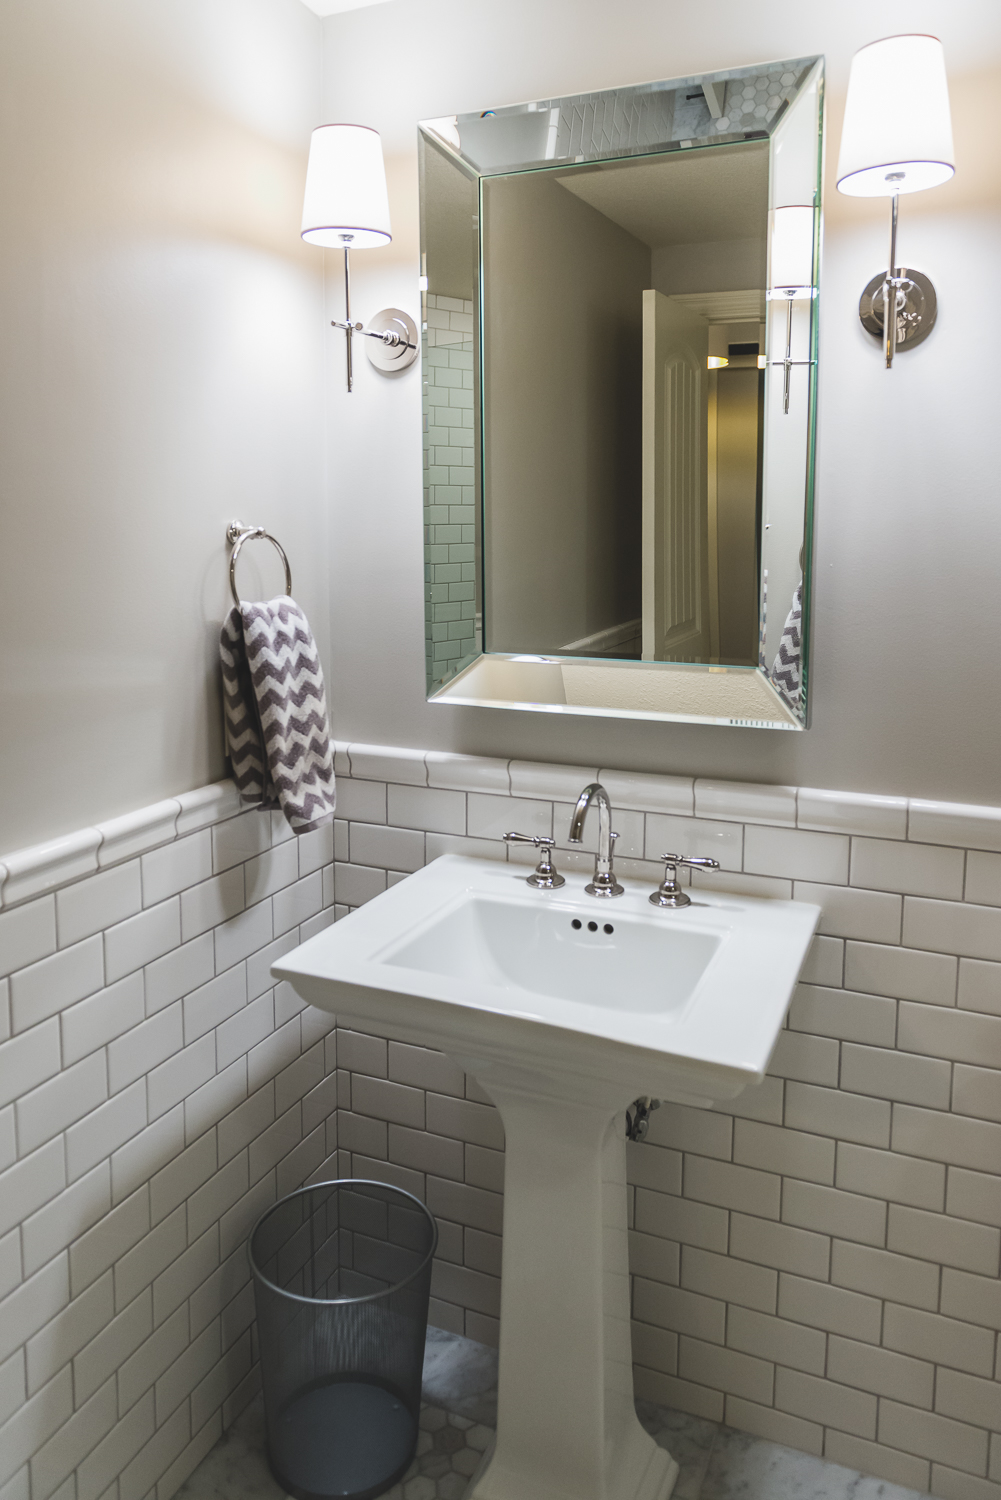 The classic bathroom is a perfect addition for the space.  www.saranobledesigns.com